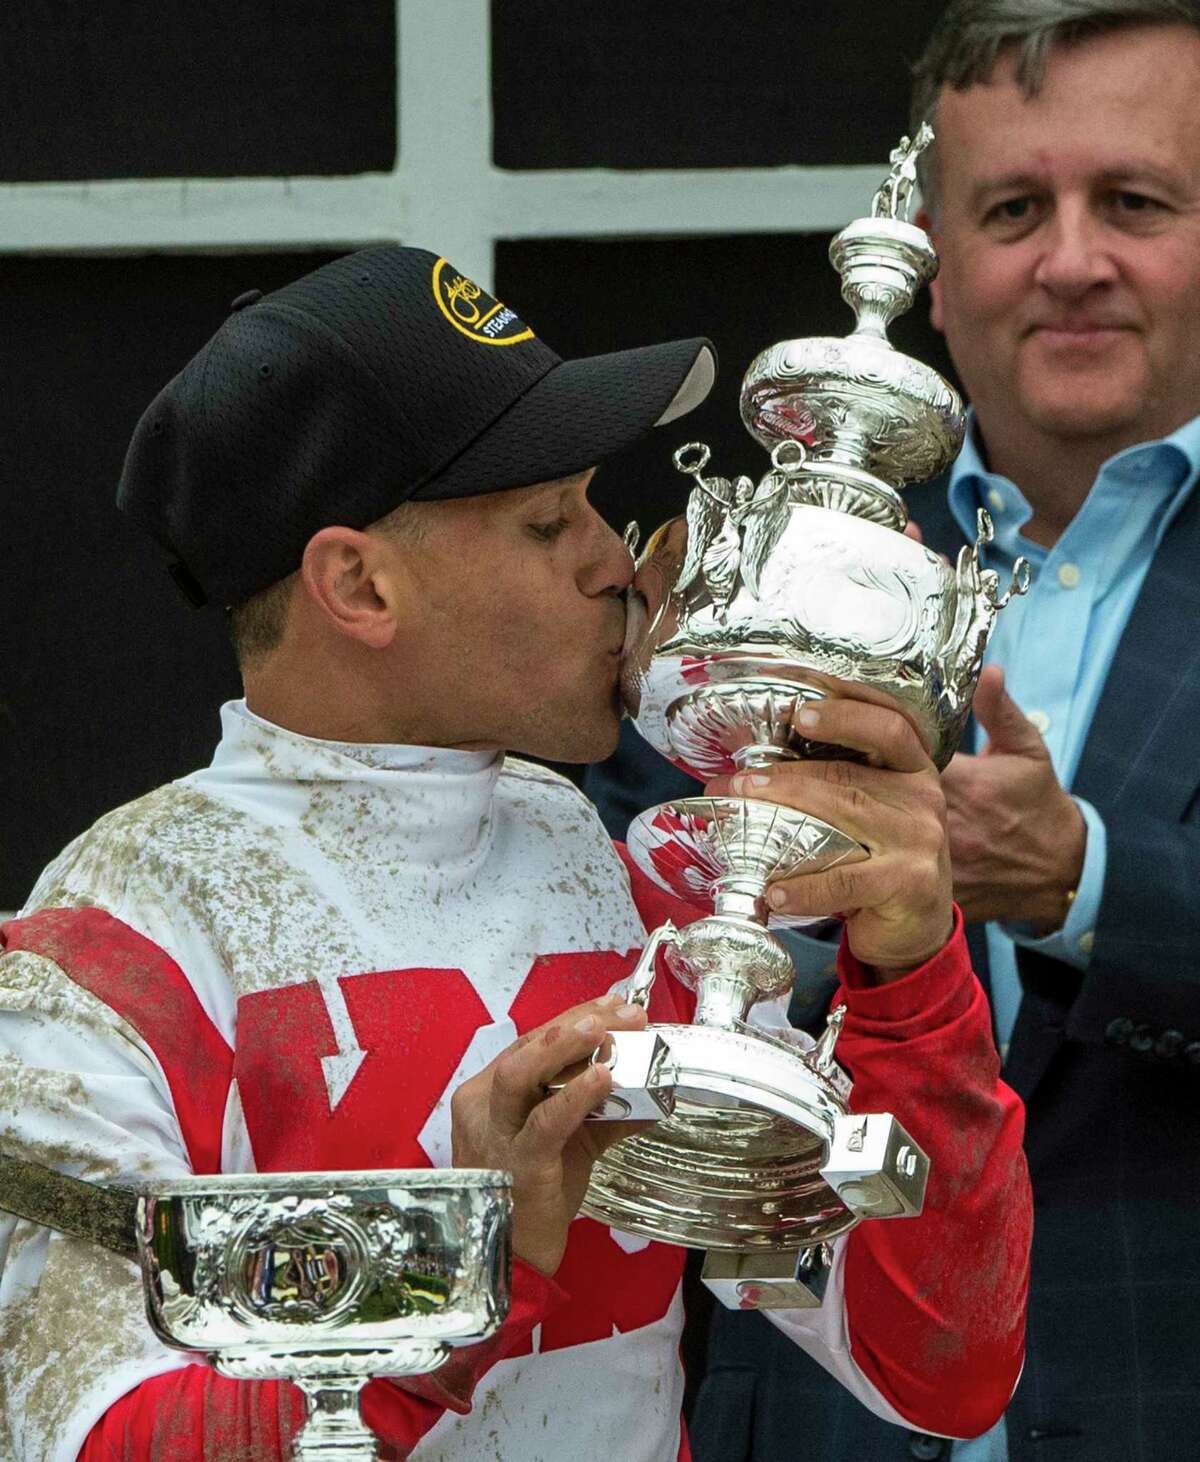 Cloud Computing's jockey Javier Castellano kisses the winner's trophy aloft after winning the 142nd running of the Preakness Stakes Saturday May 20, 2017 at Pimlico Race Course in Baltimore, MD (Skip Dickstein/Times Union)